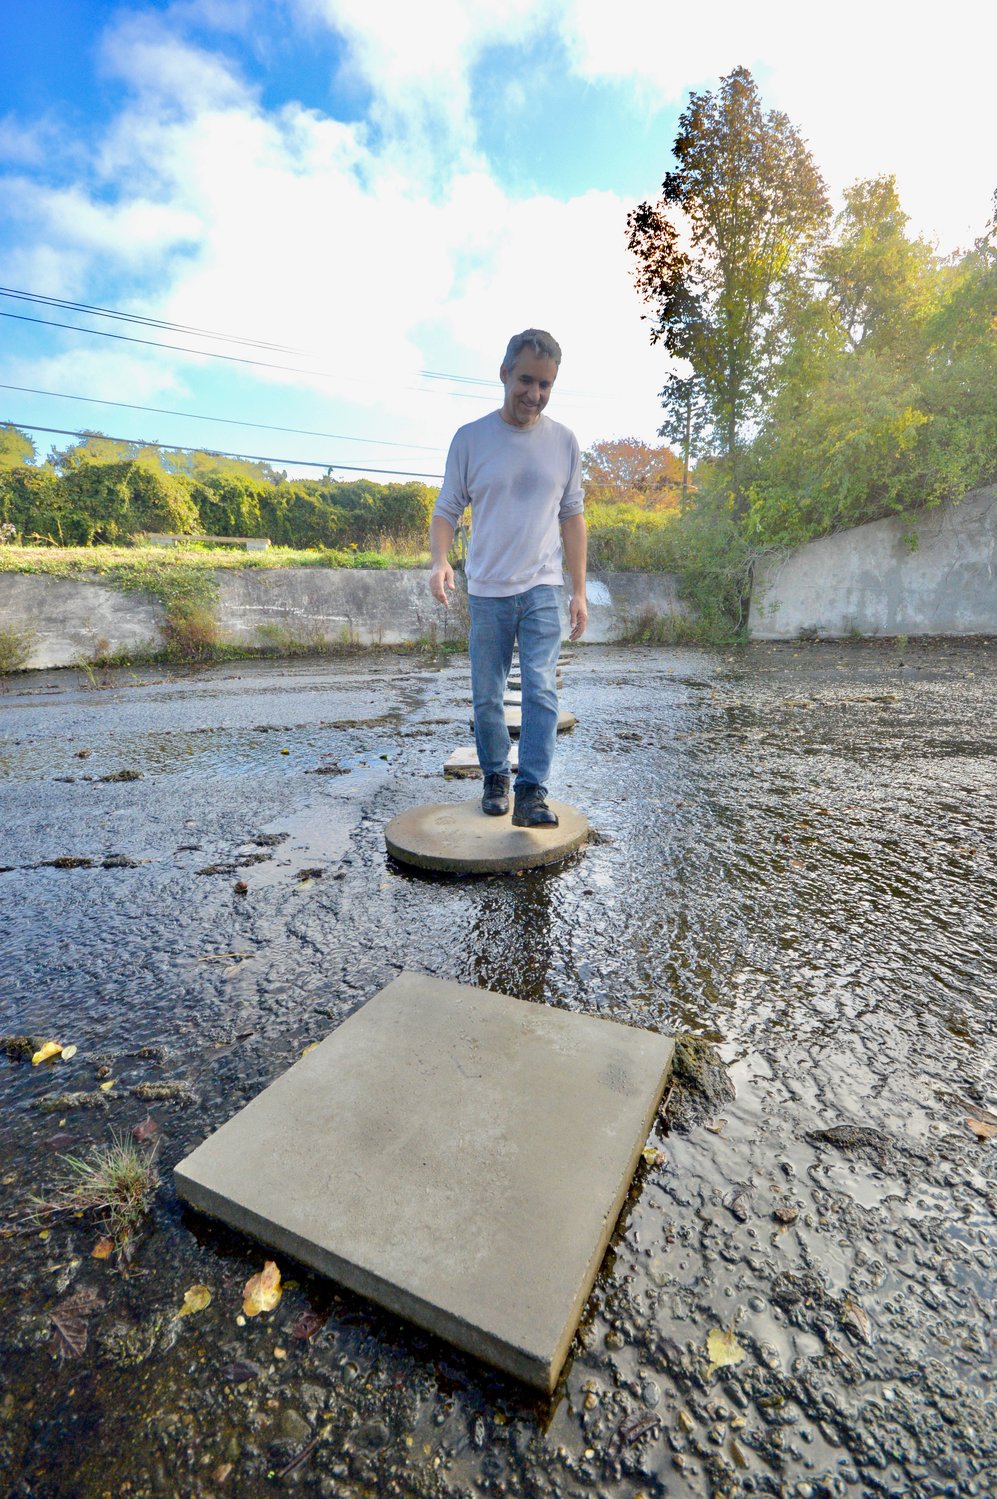 Stephen Luce walks over a stream located on the western edge of Melville Park. Some of the flat stones had to be replaced after a heavy rainfall washed them away.